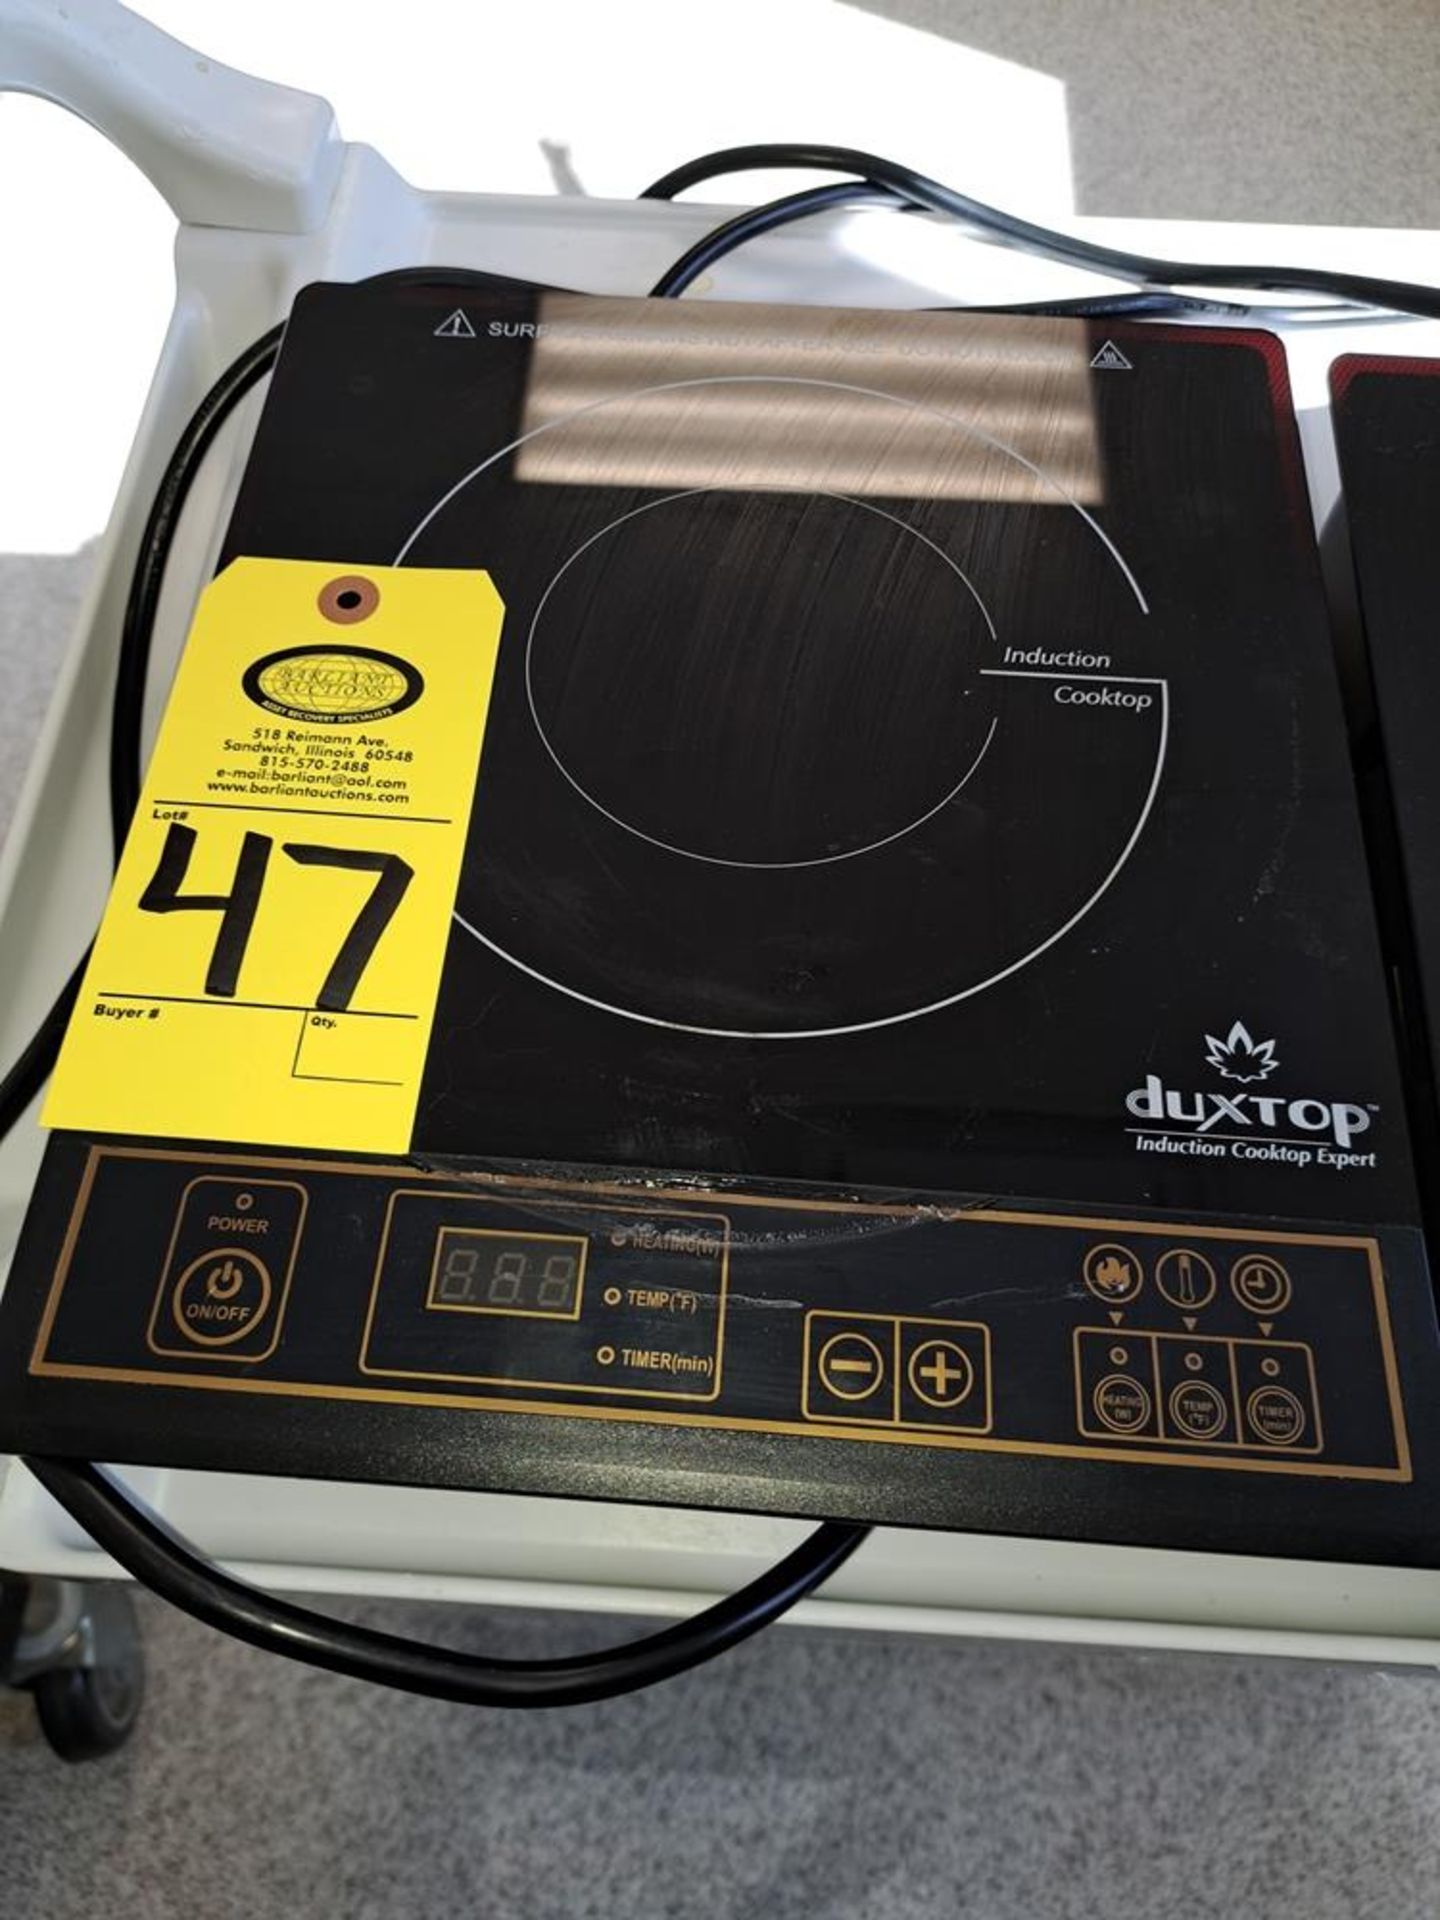 Dux Top Mdl. 8100MC Induction Cooktop, 11 1/2" W X 10 1/2" cooktop, 115 volts-Removal Is By - Image 2 of 3